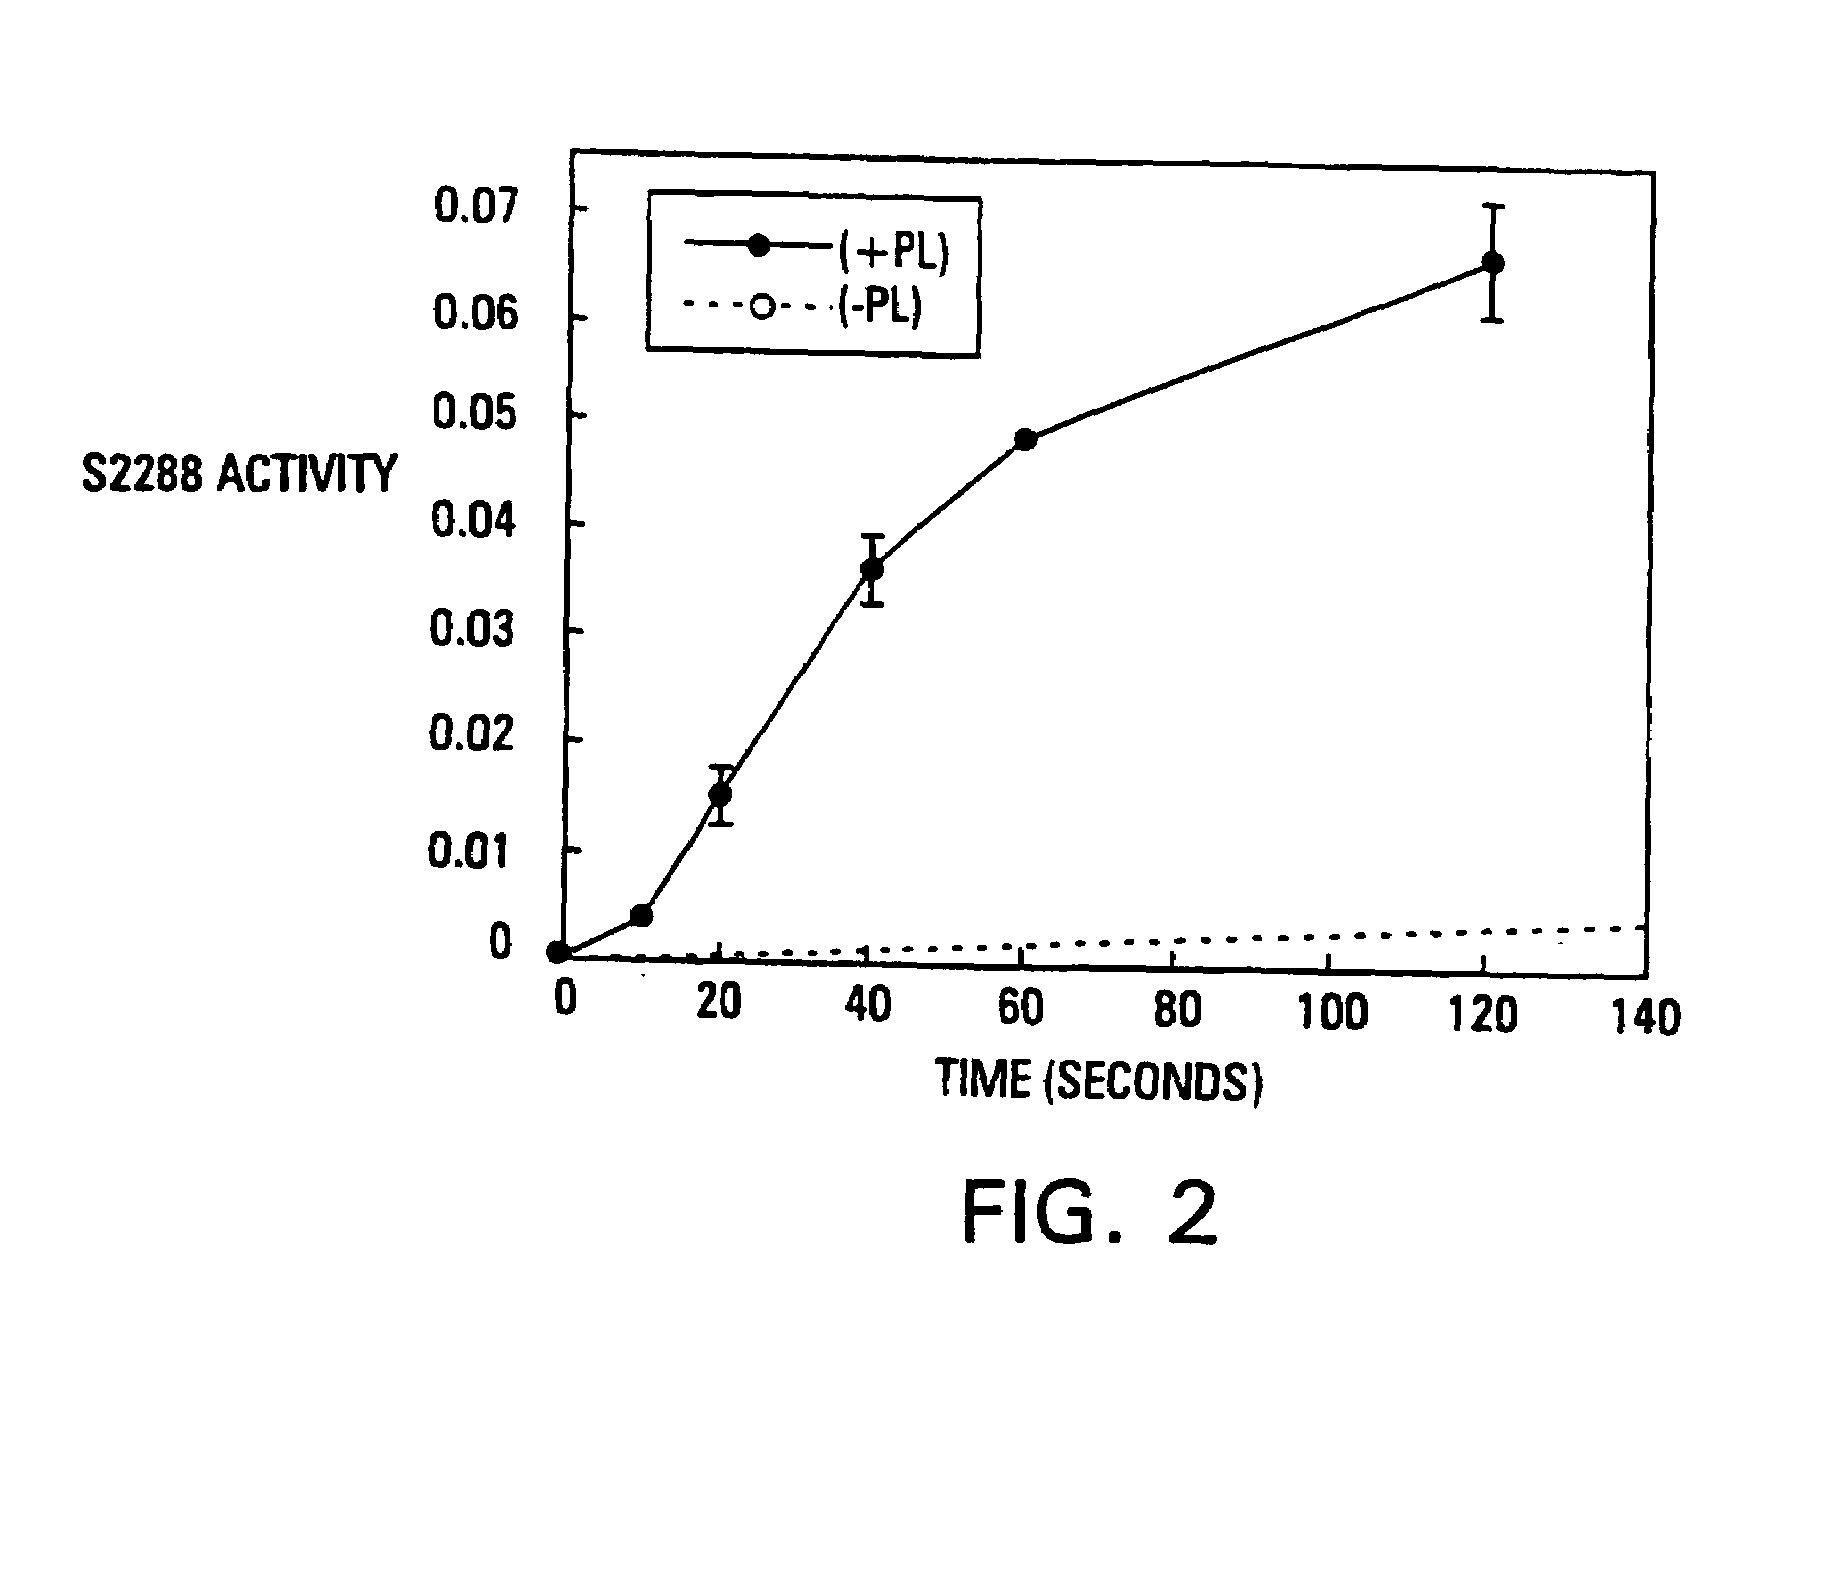 Modified vitamin K-dependent polypeptides